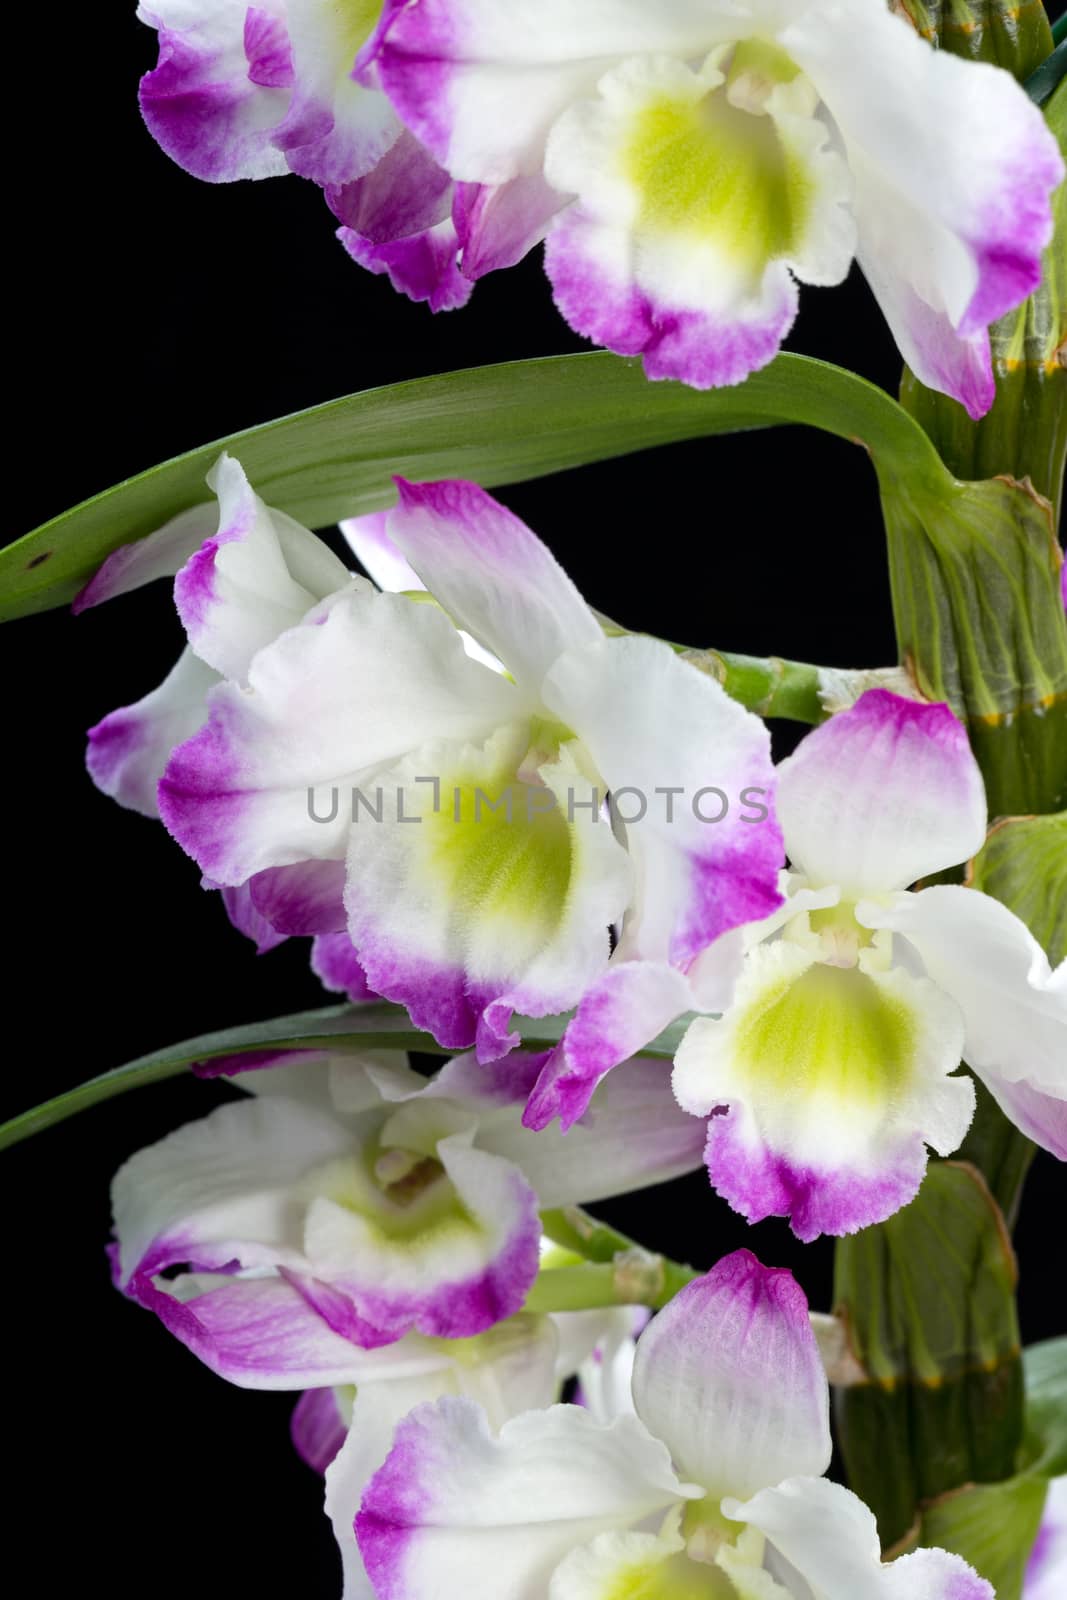 Dendrobium Orchid hybrids. Isolated on black